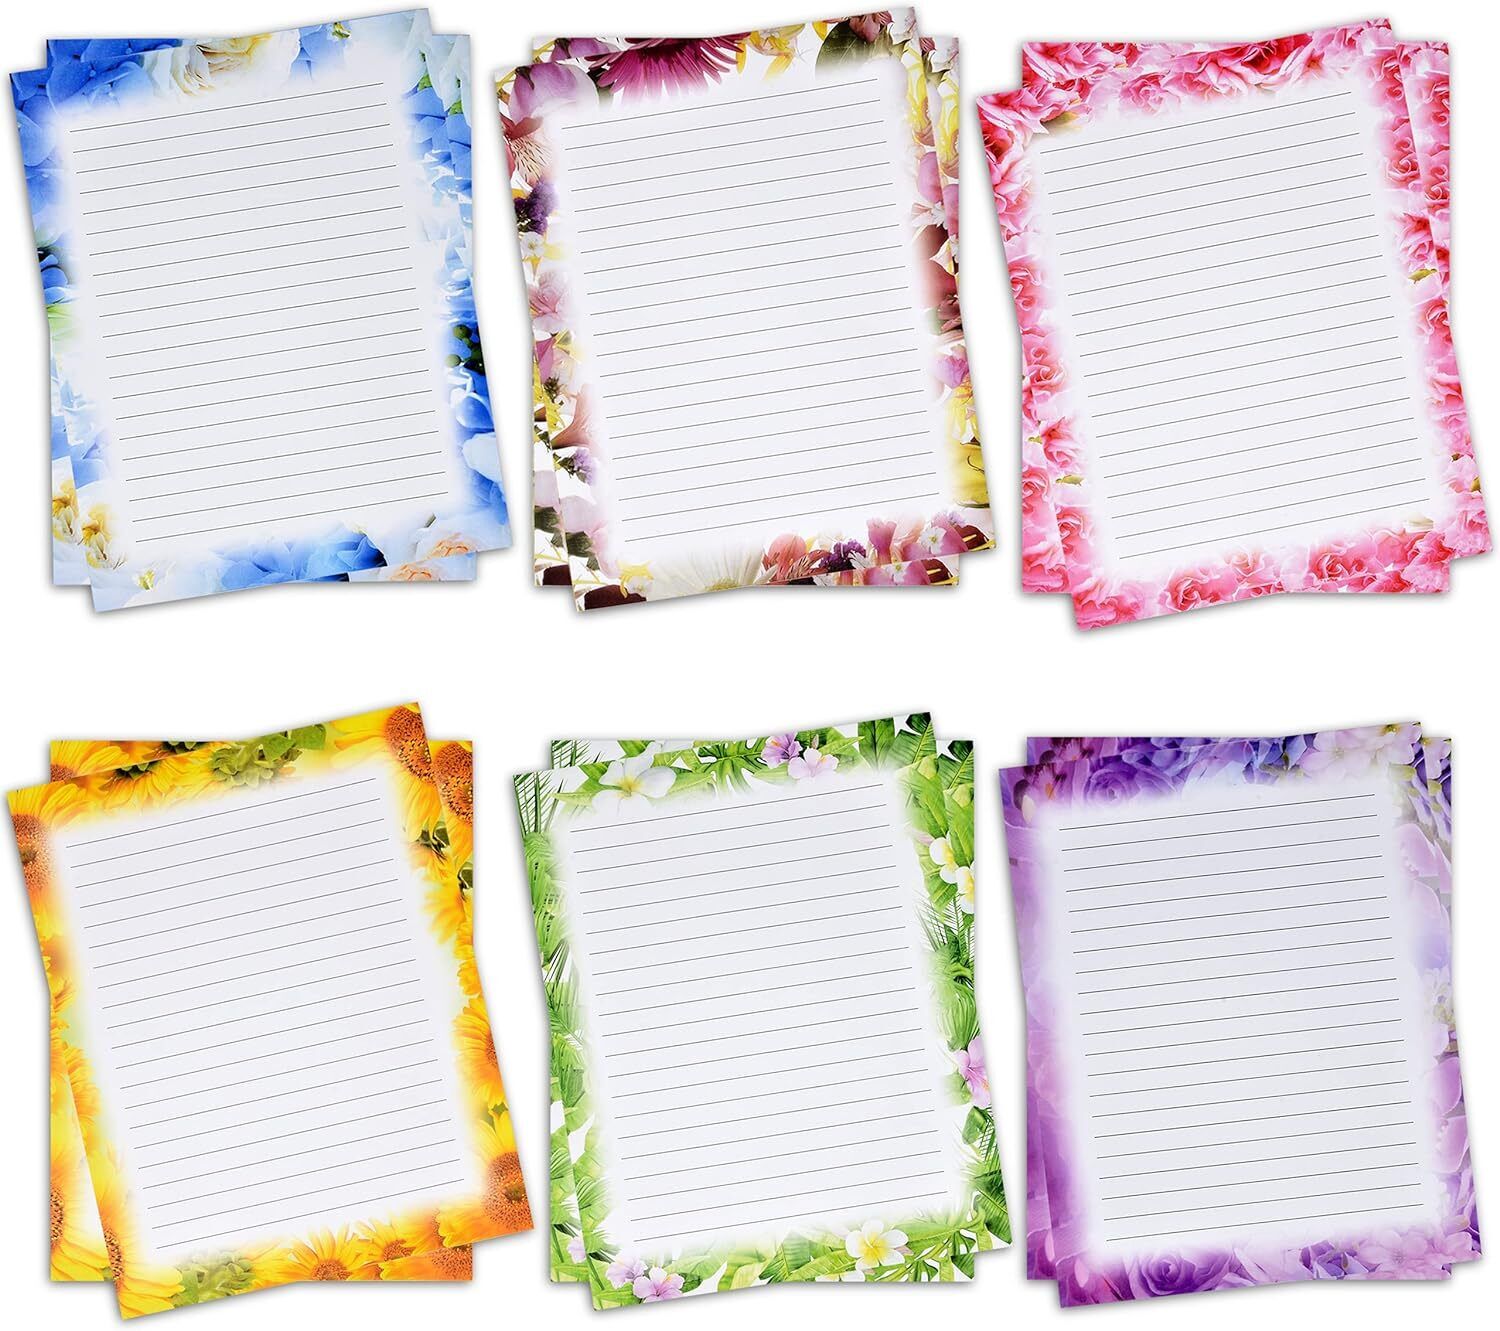 120Pcs Flower Stationary Paper Lined 8.5x11 Lined Stationary Writing Paper Fancy